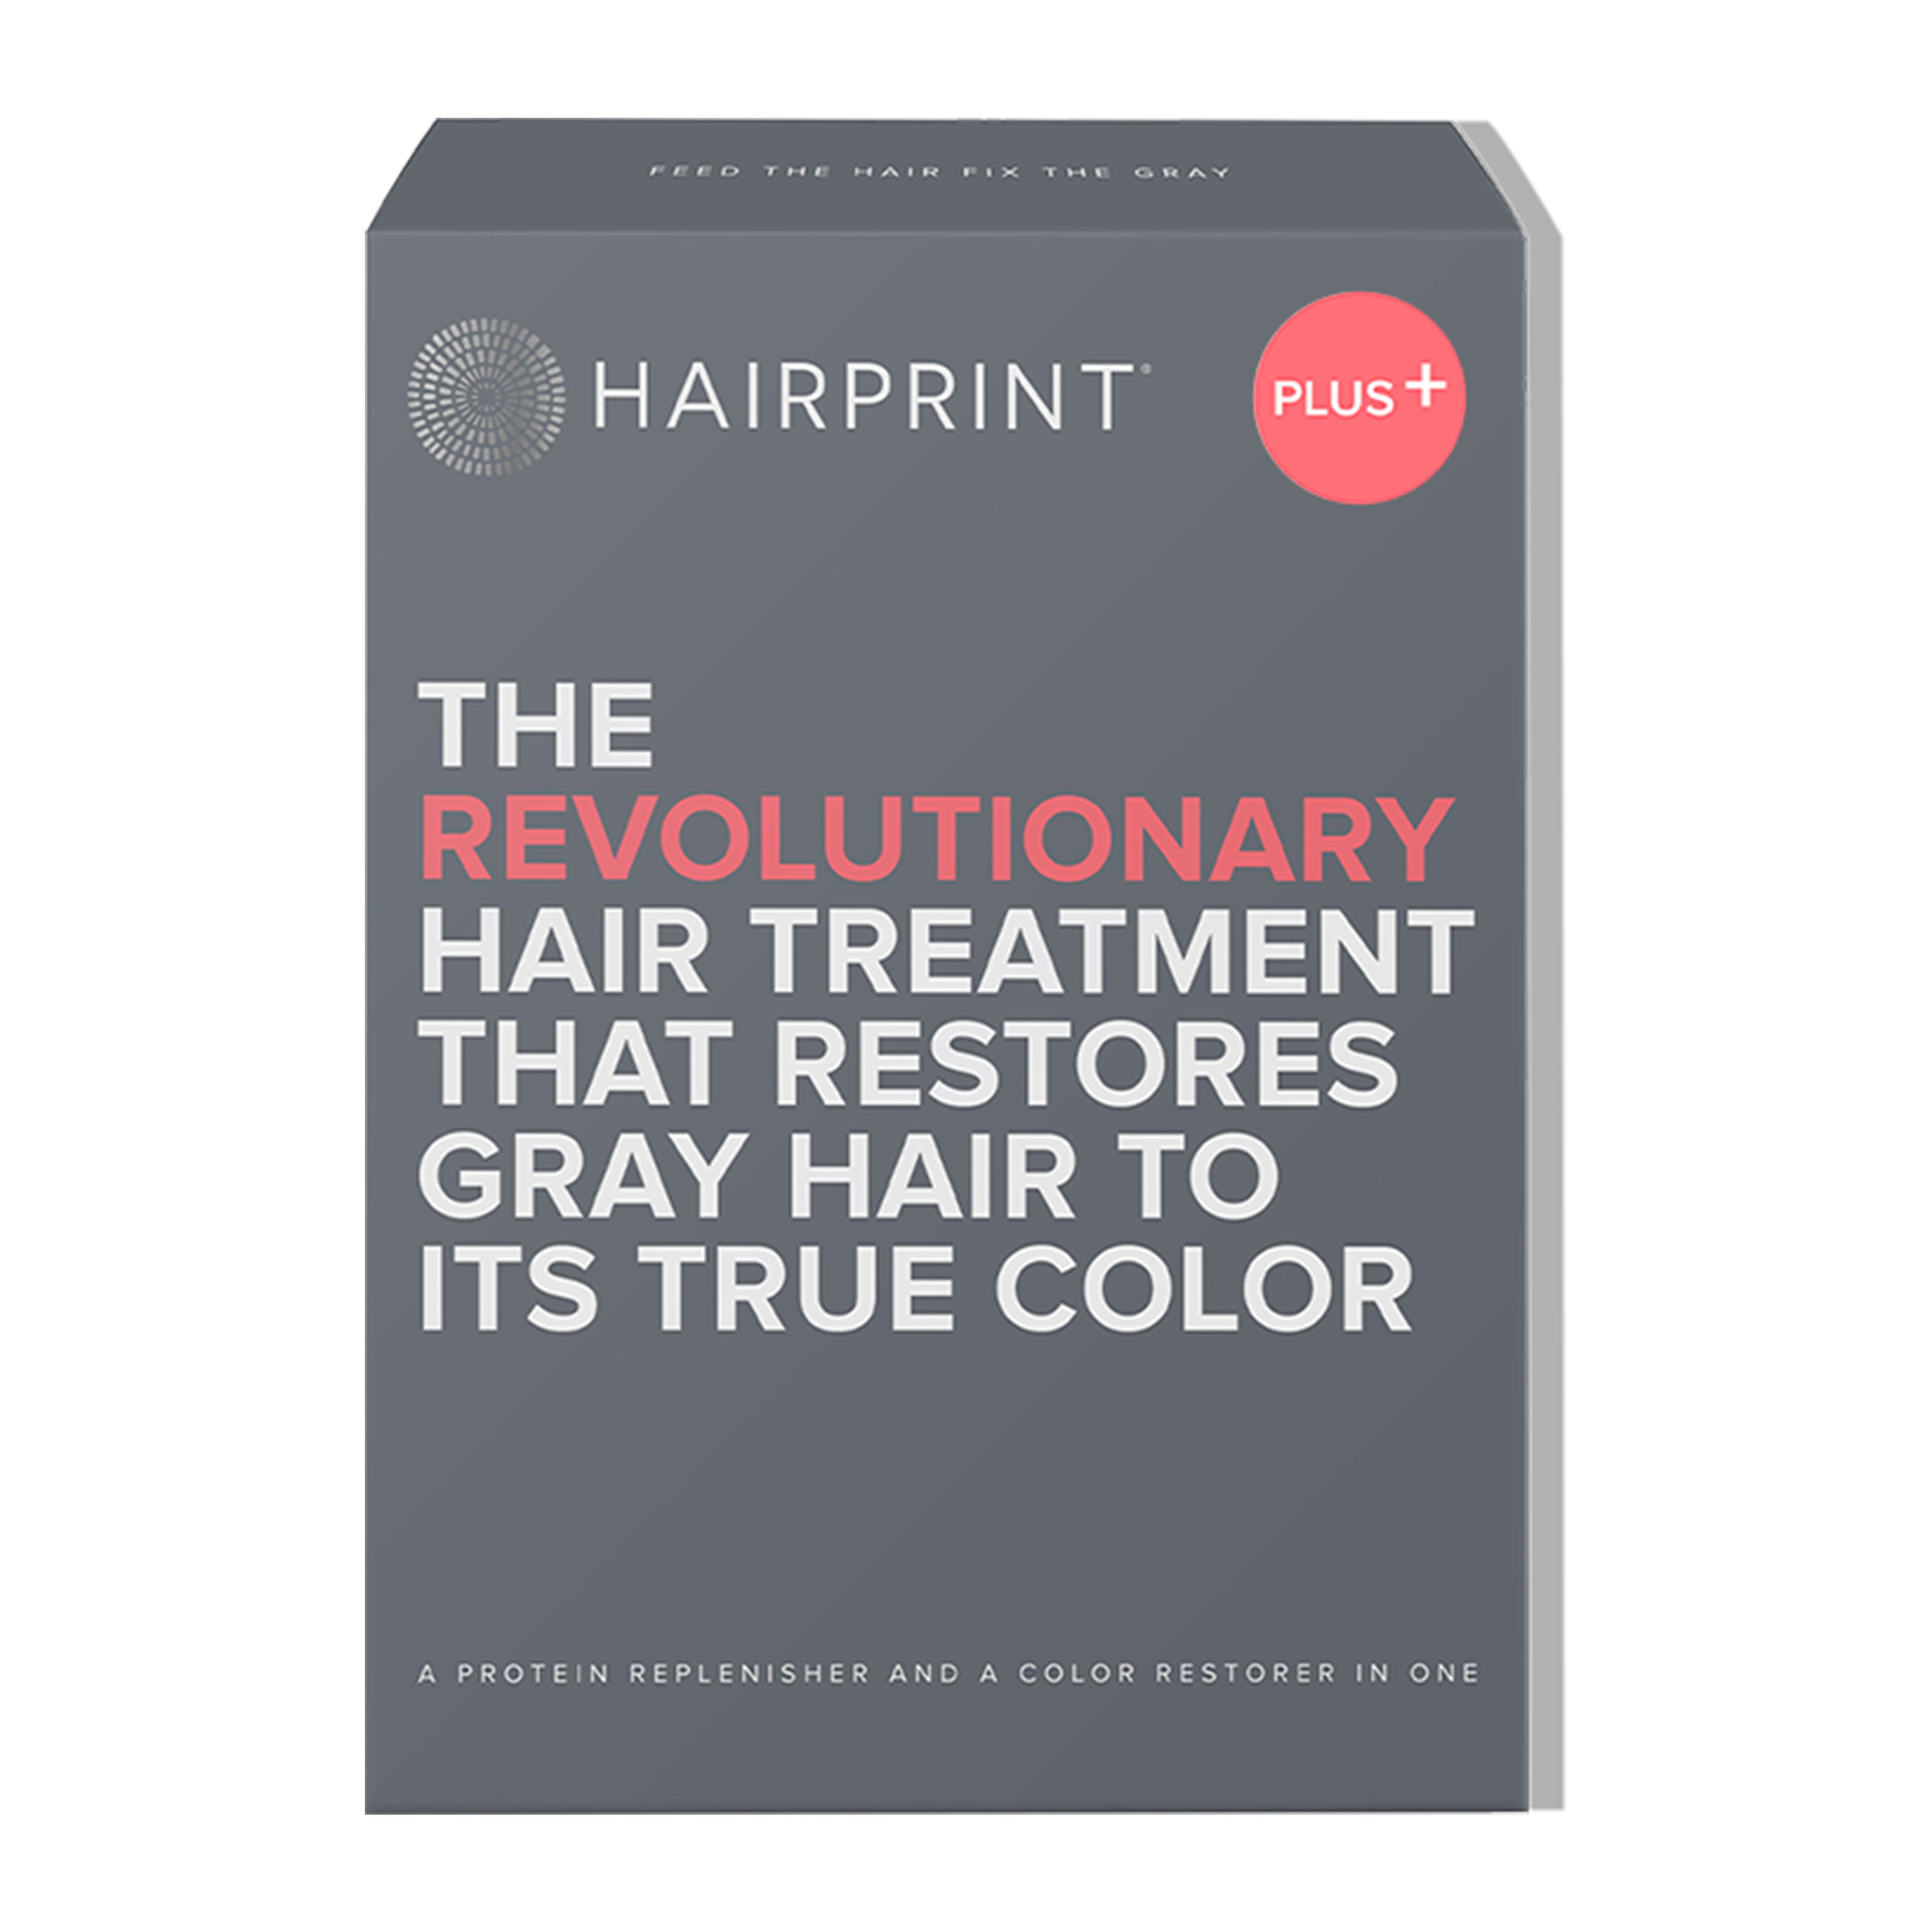 HAIRPRINT PLUS - For thick hair or stubborn grays